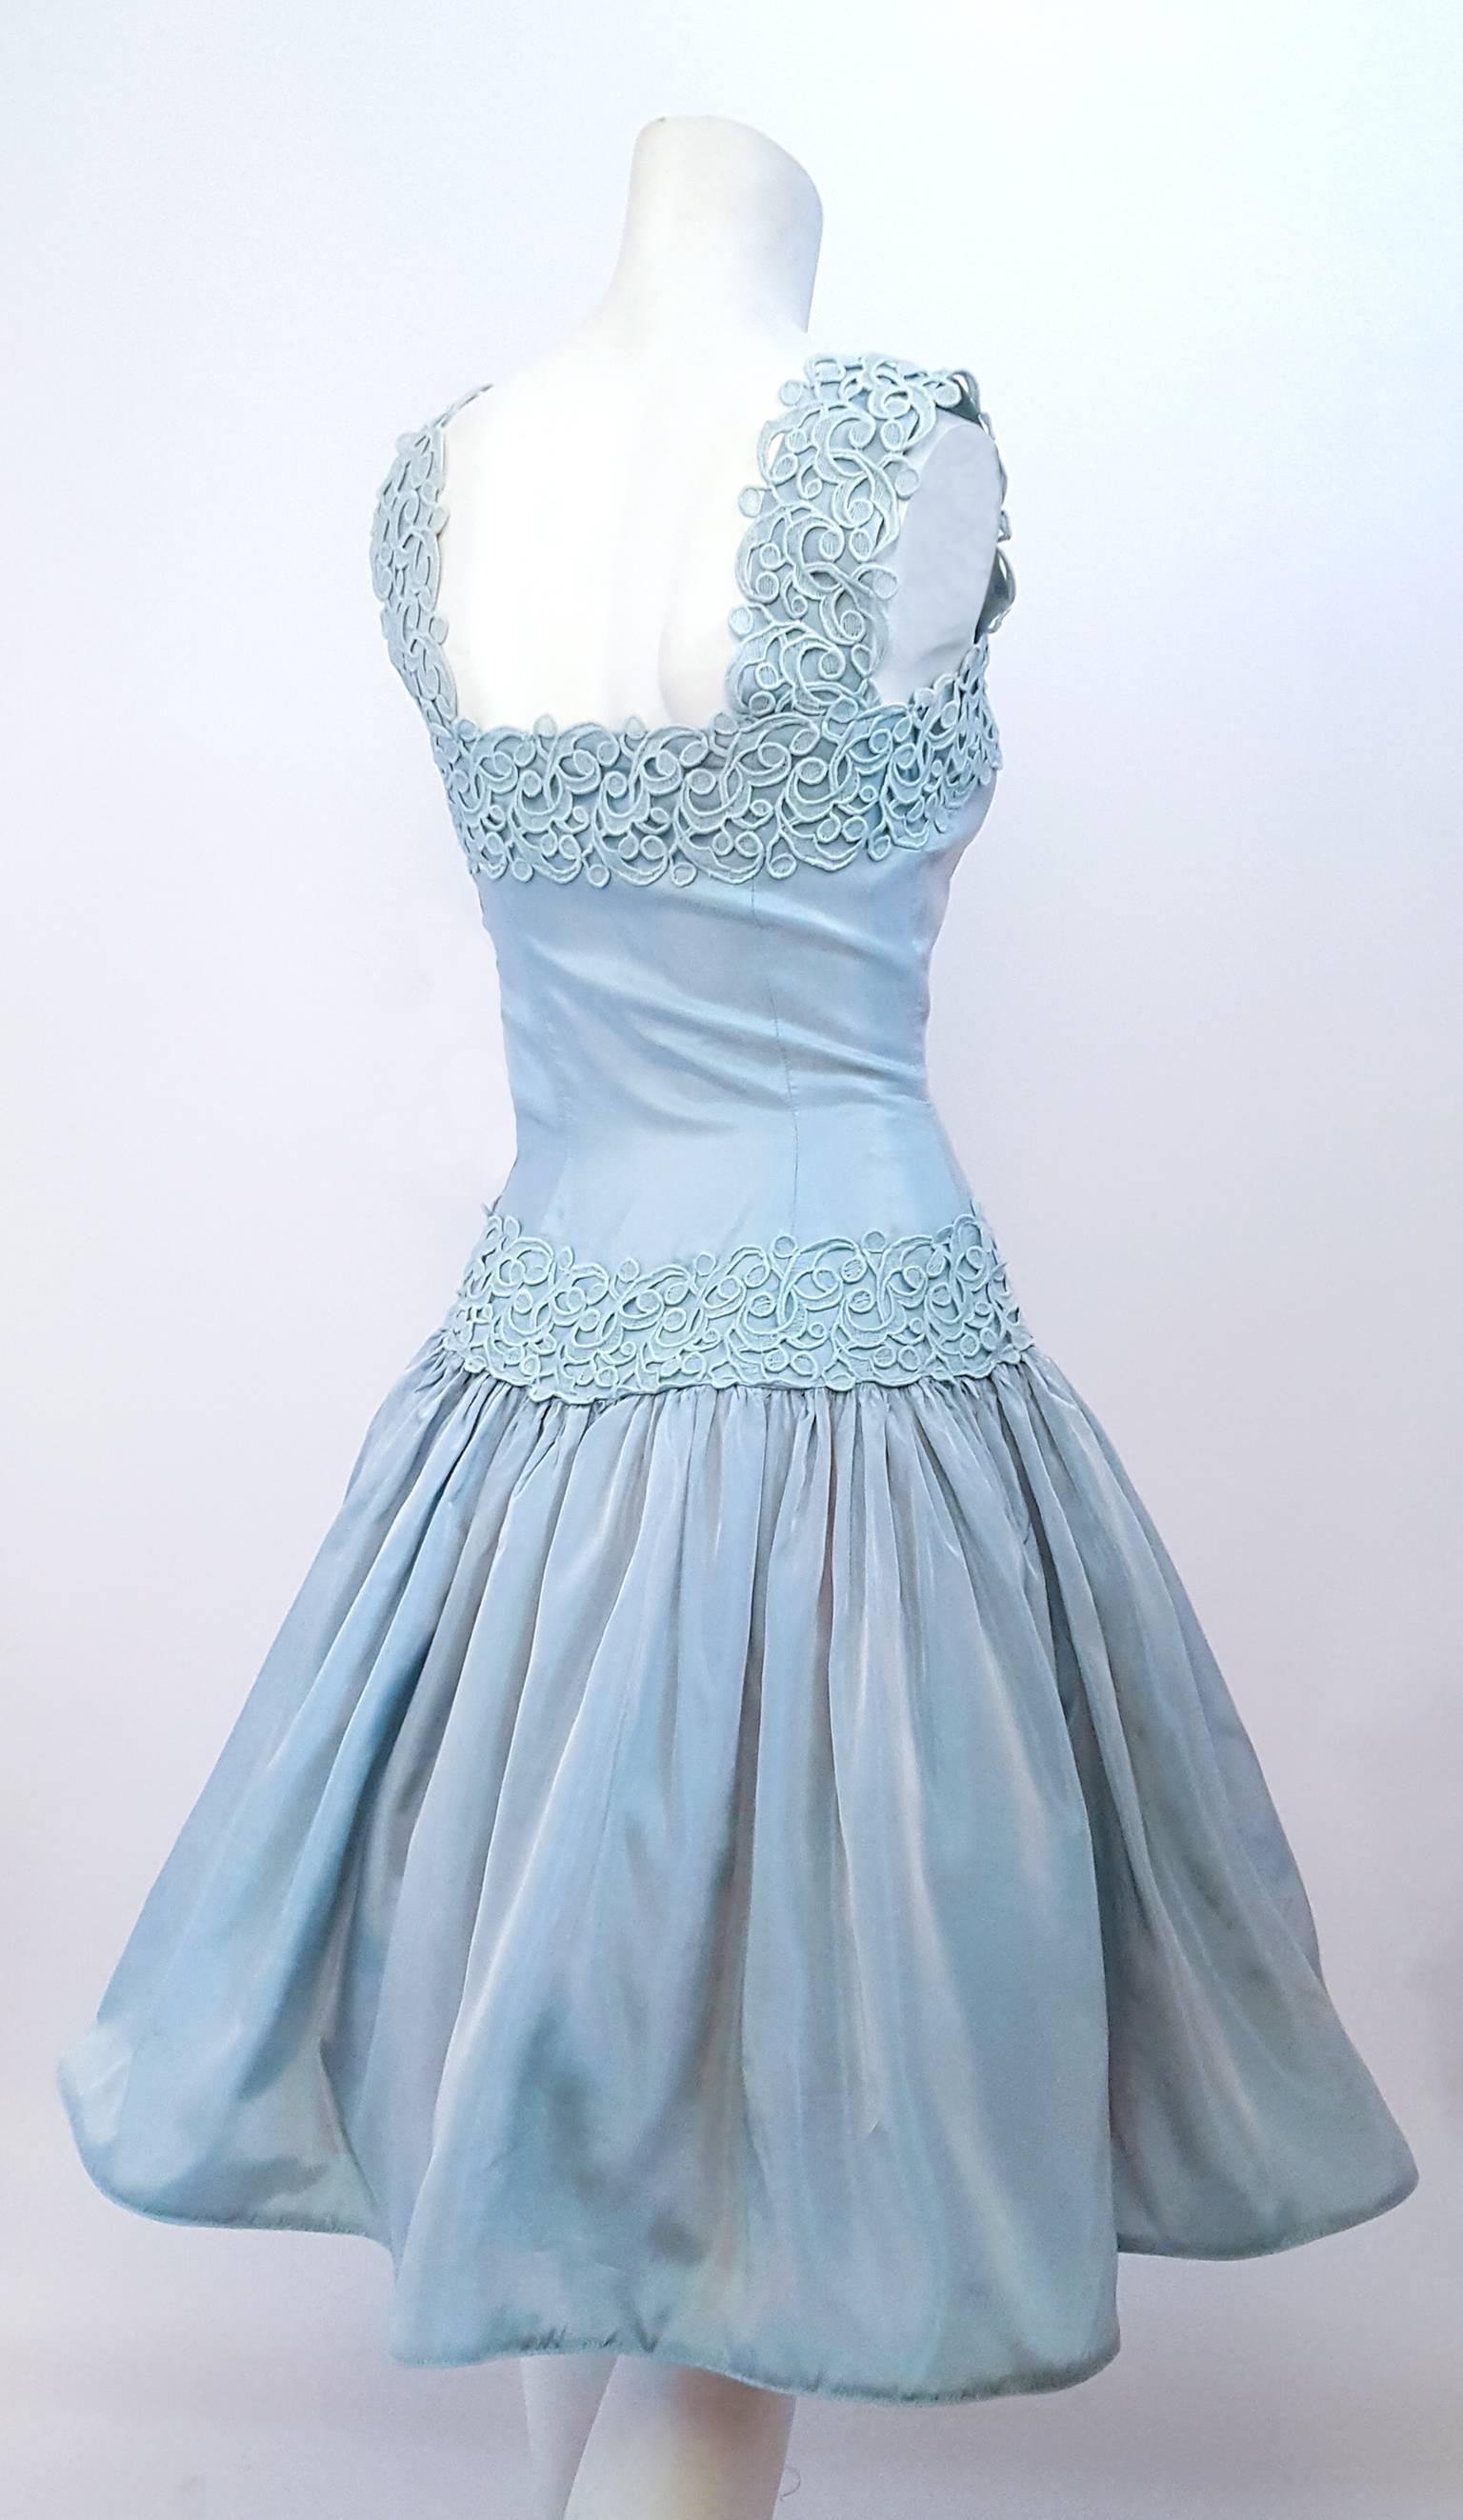 60s Iridescent Baby Blue Party Dress. Lined bodice, skirt is lined with tulle and has horsehair hem. Metal side zip. Please note that dress is styled with petticoat.